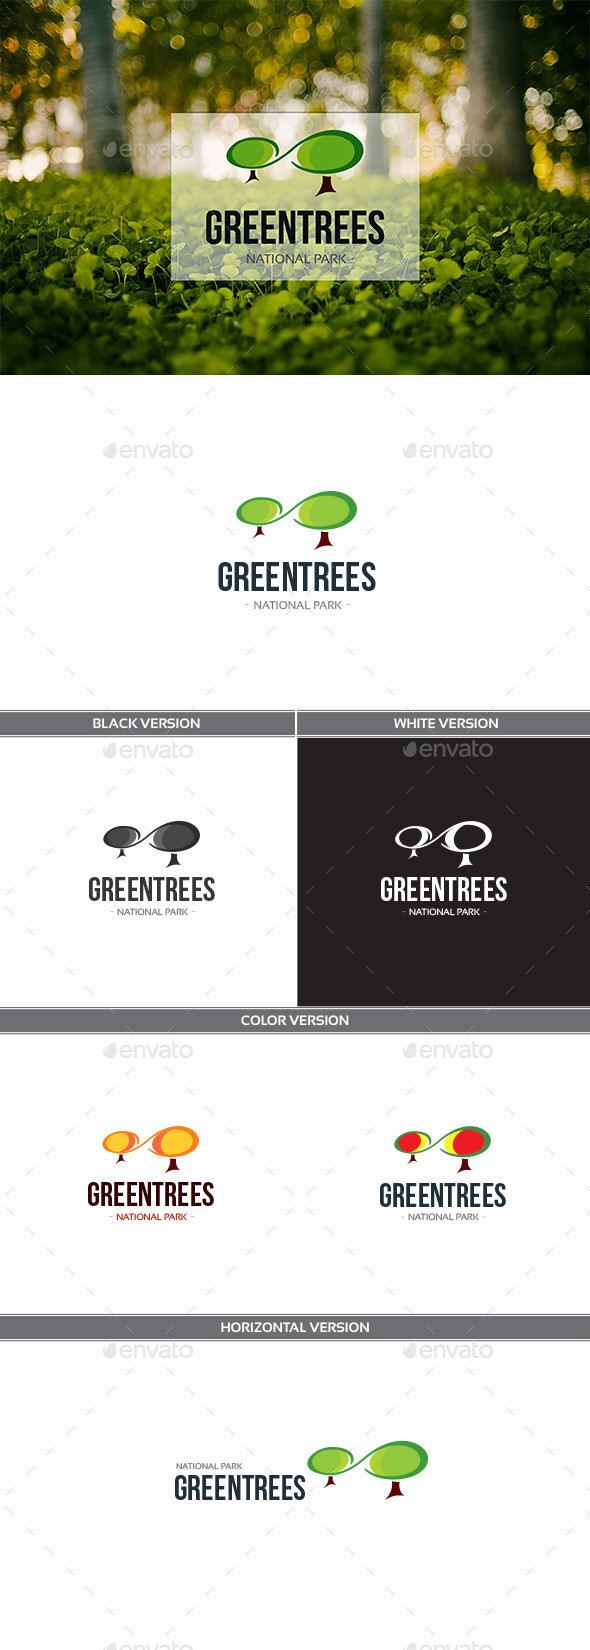 Preview 20greentrees 20logo